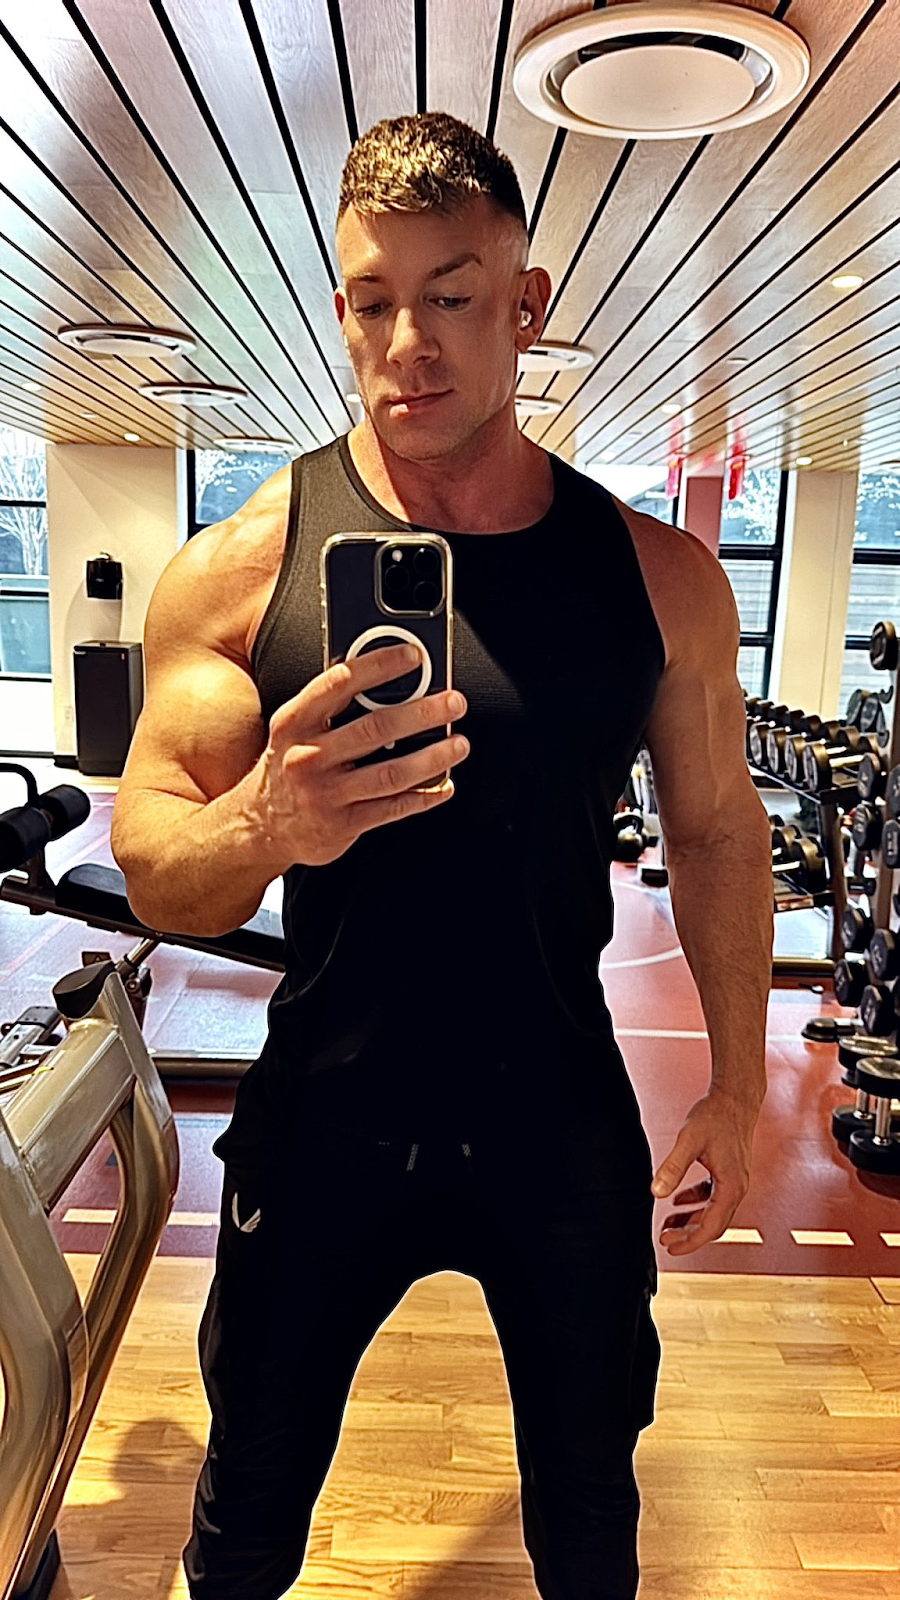  Bruce Beckham taking an iphone mirror selfie in black tank top showing off bulging biceps in front of gym weight rack